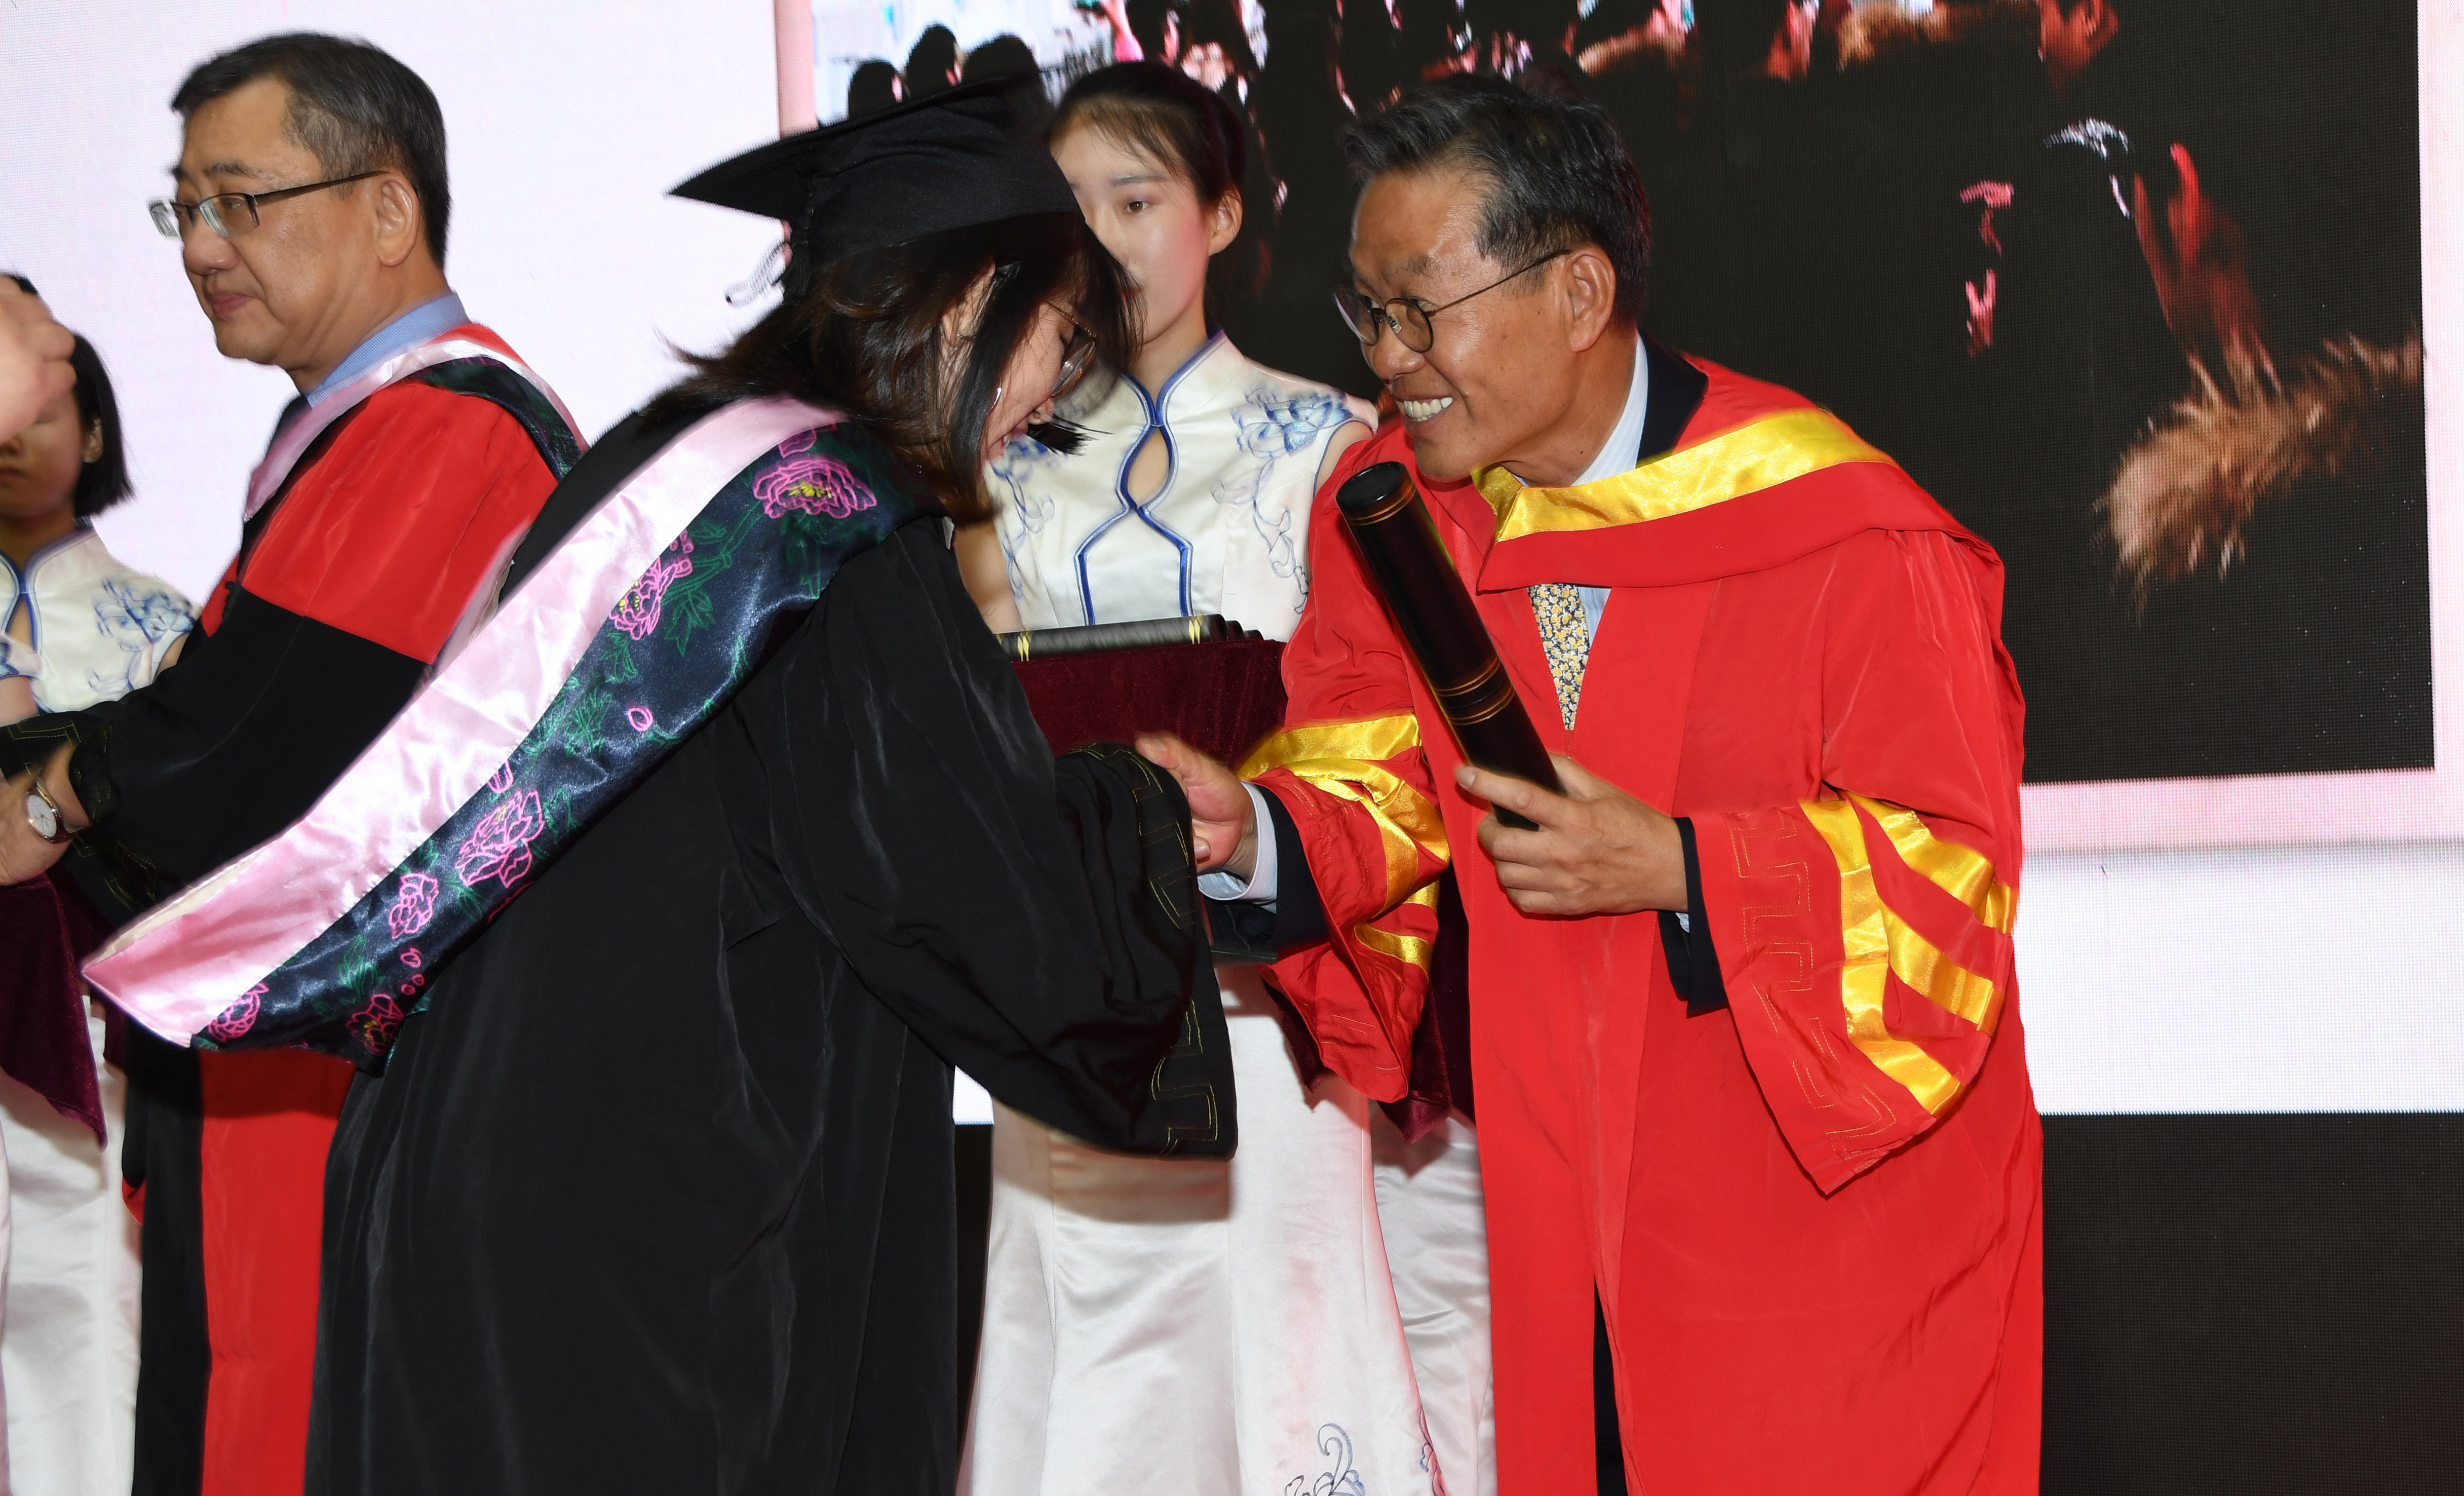 Dr. Youngski Kwak, DSU professor of accounting, presents a diploma to one of the graduates.